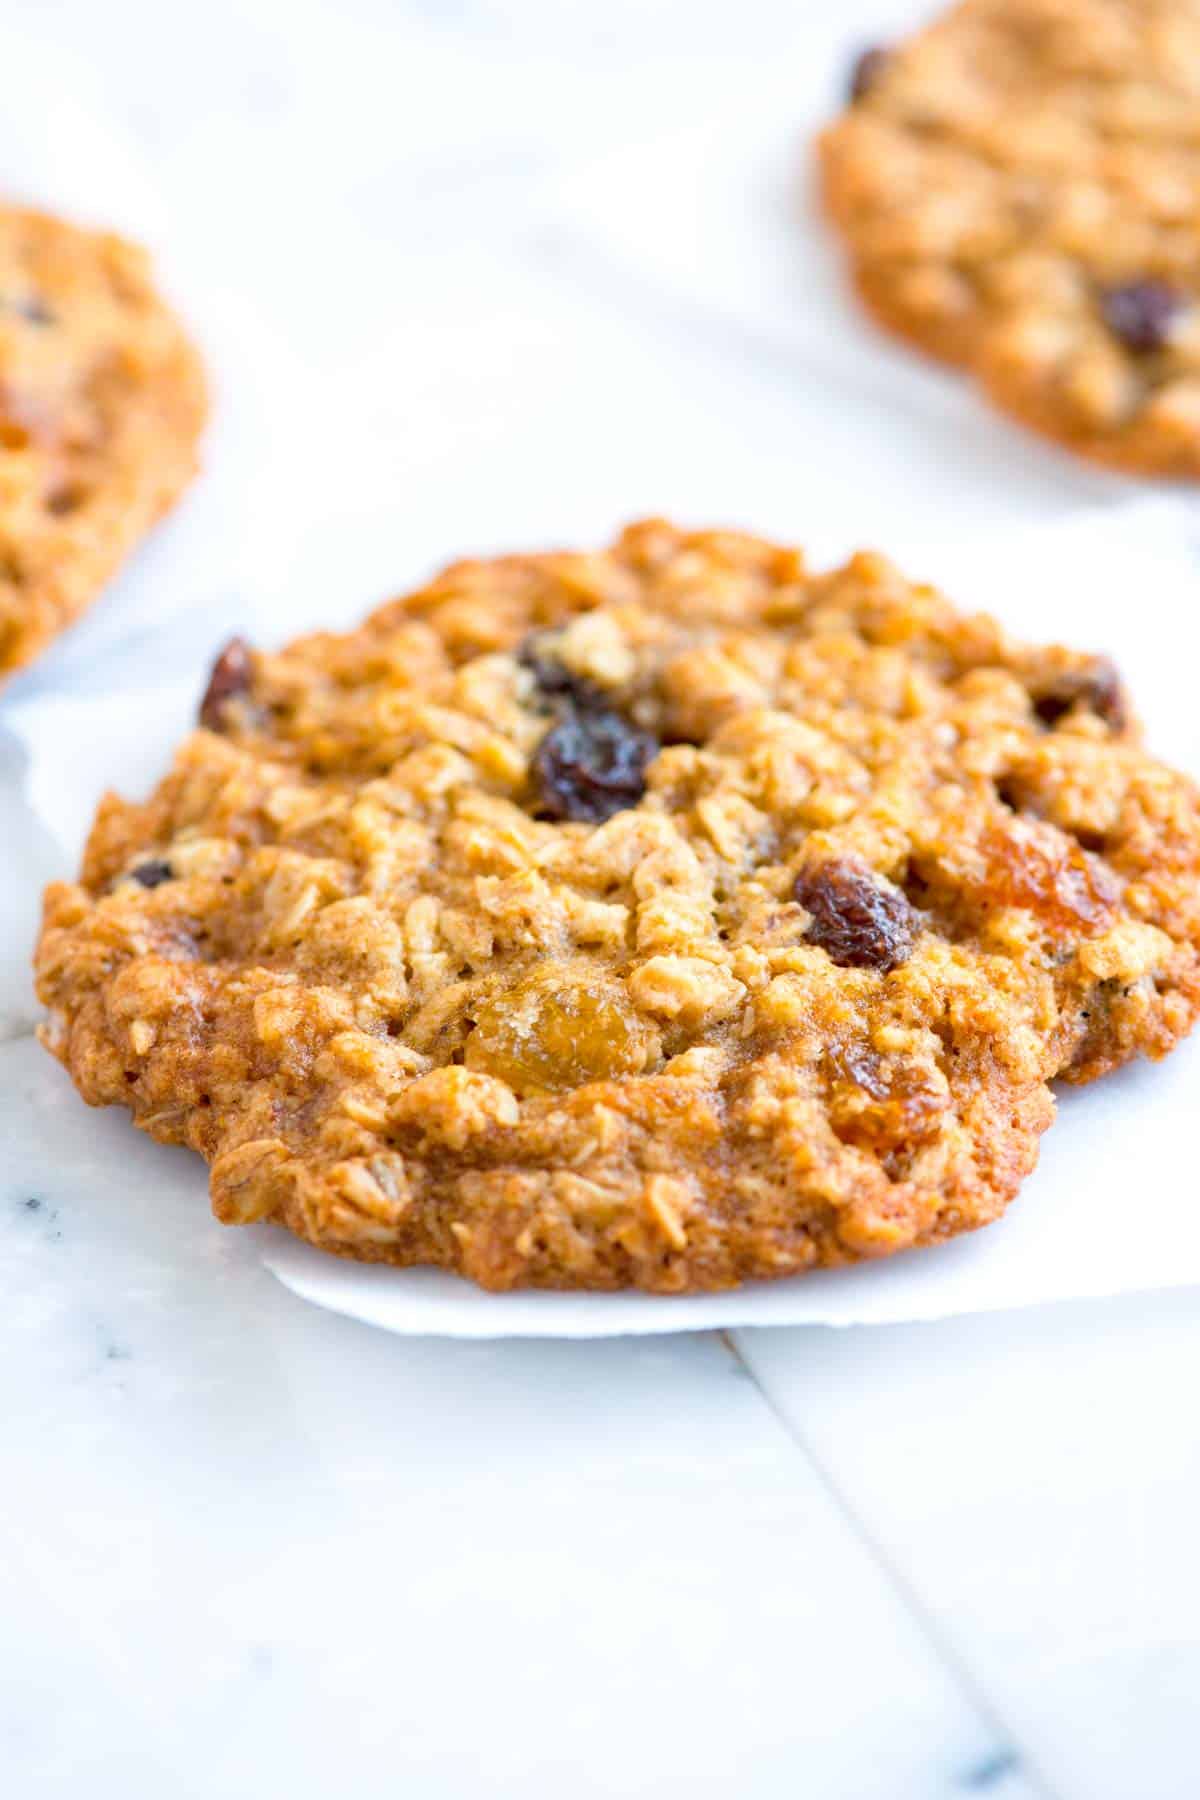 How to Make the Best Soft and Chewy Oatmeal Raisin Cookies